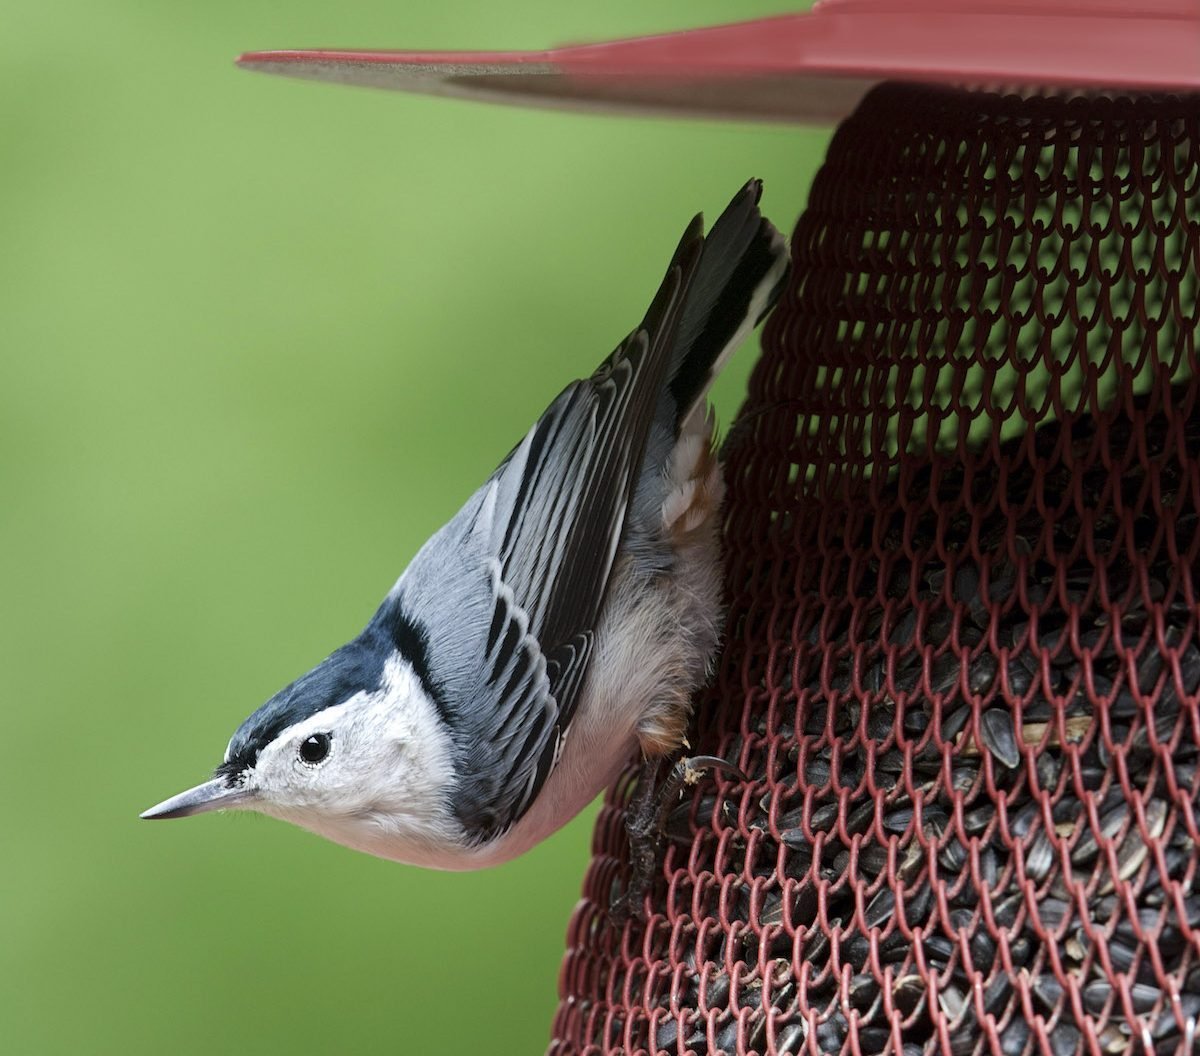 White-breasted nuthatch eating sunflower seeds